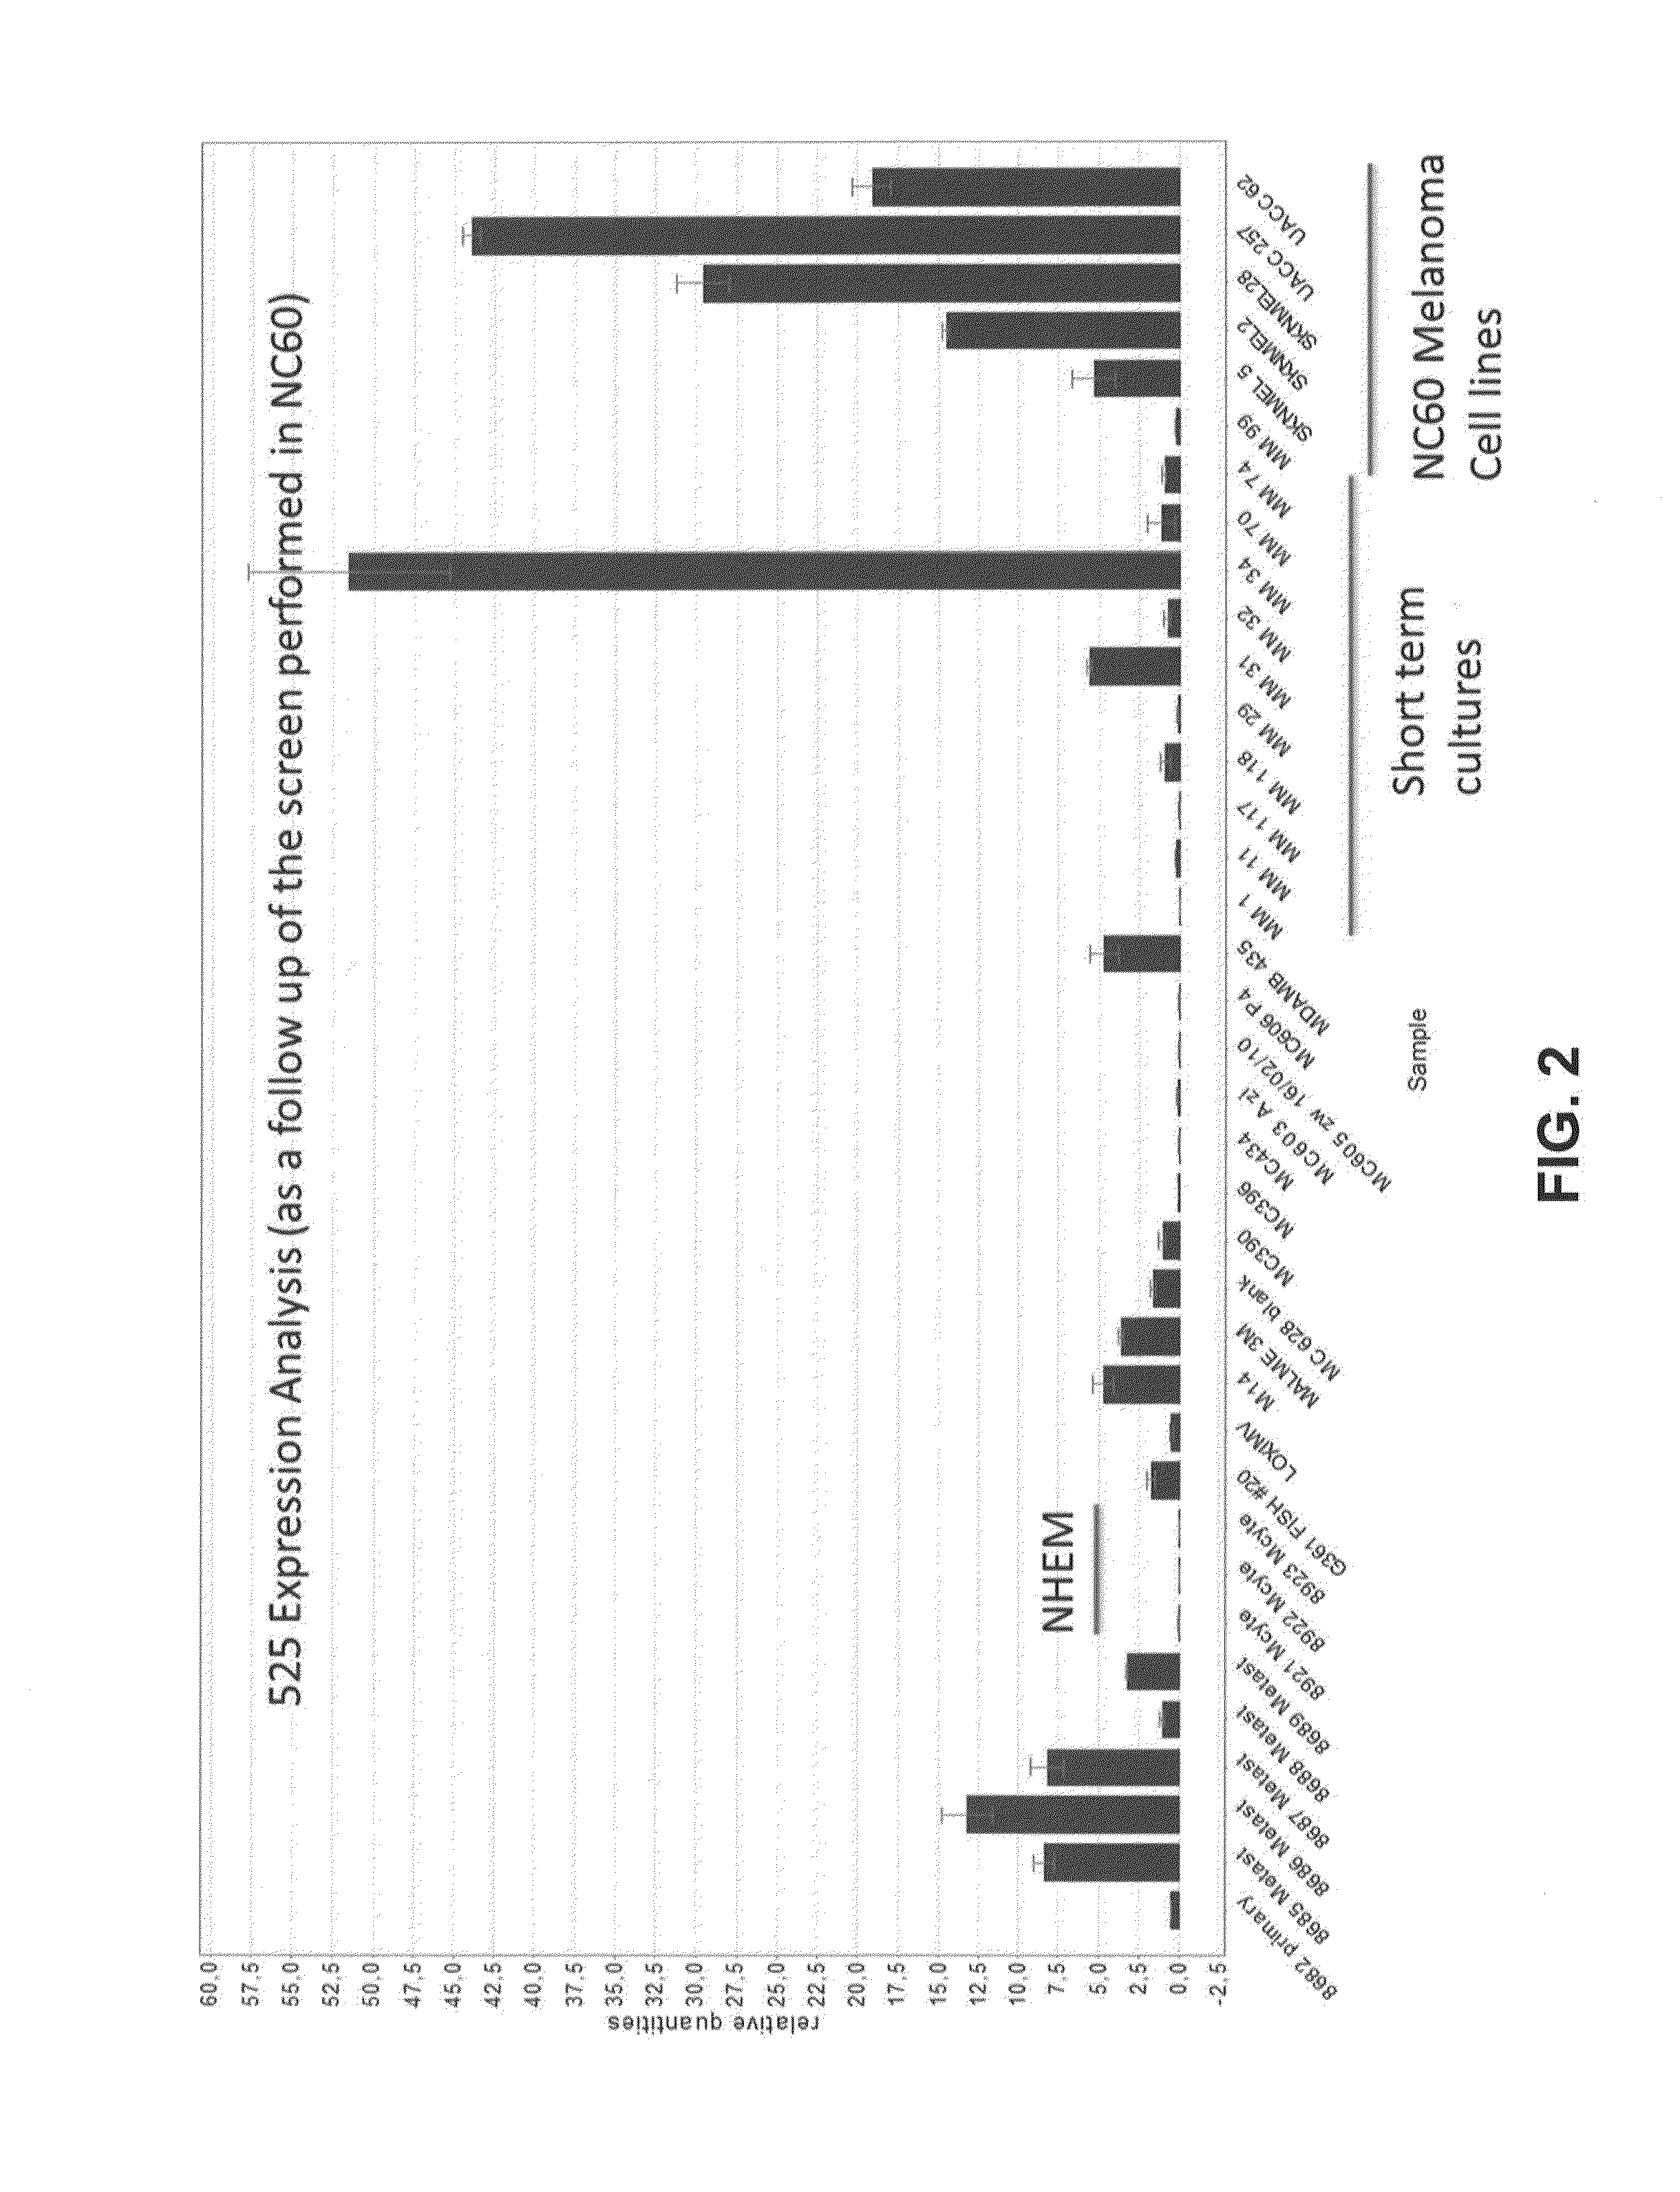 INHIBITION OF A lncRNA FOR TREATMENT OF MELANOMA